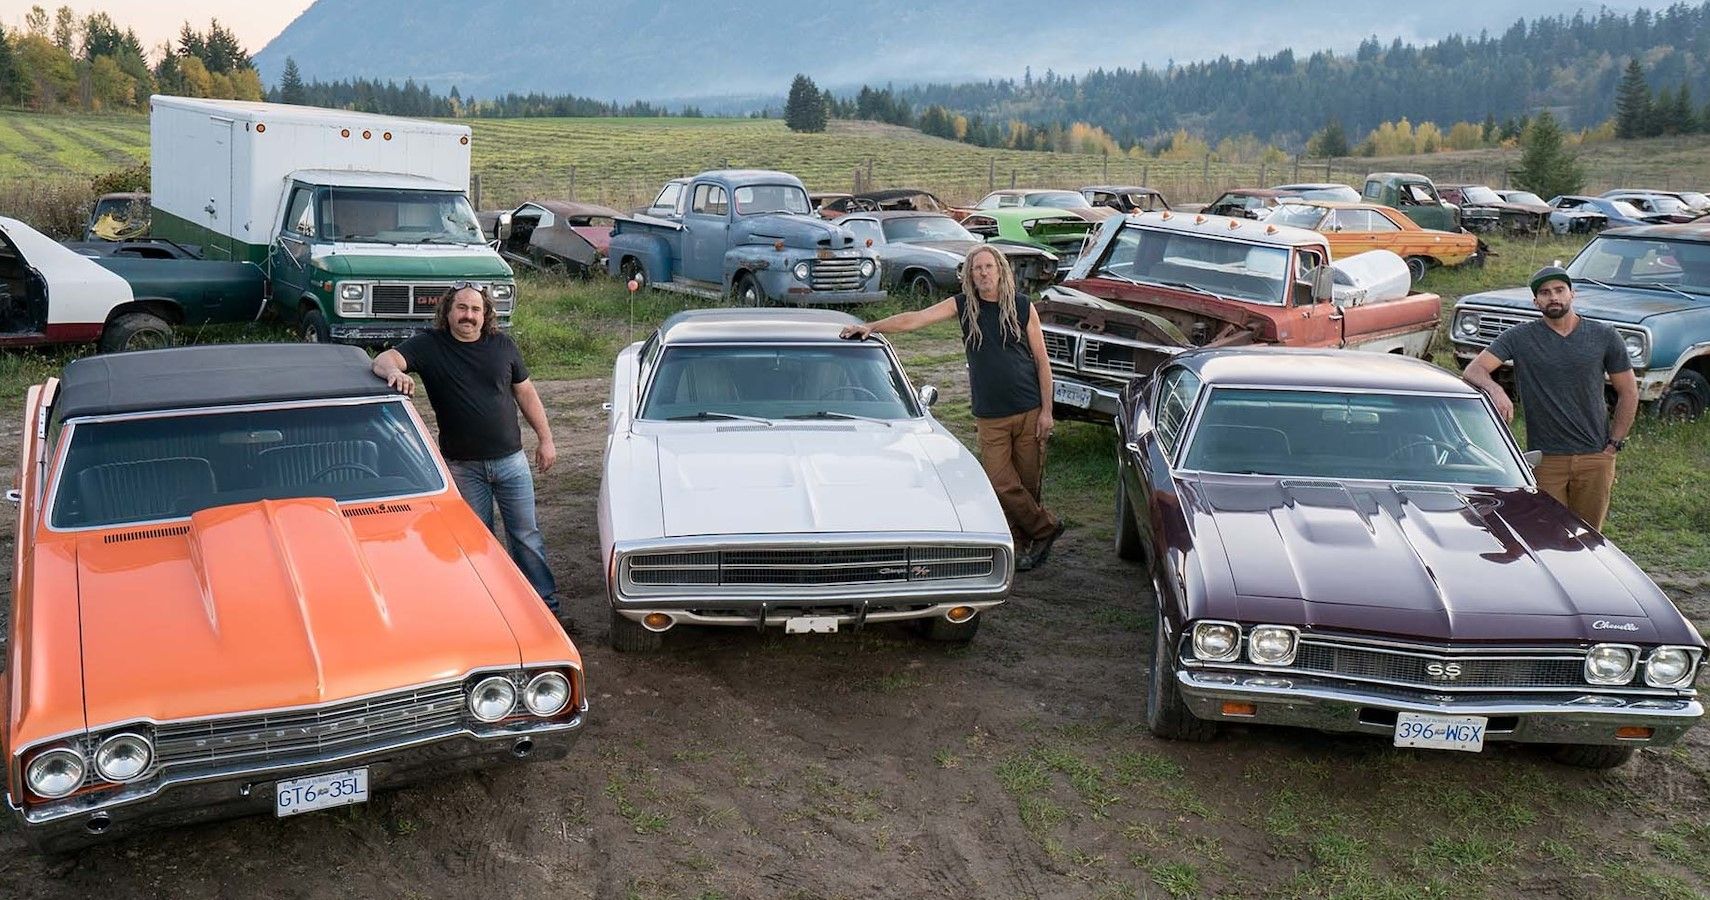 Mike Hall with his empire of rusty classic cars, trucks, and other cool vehicles